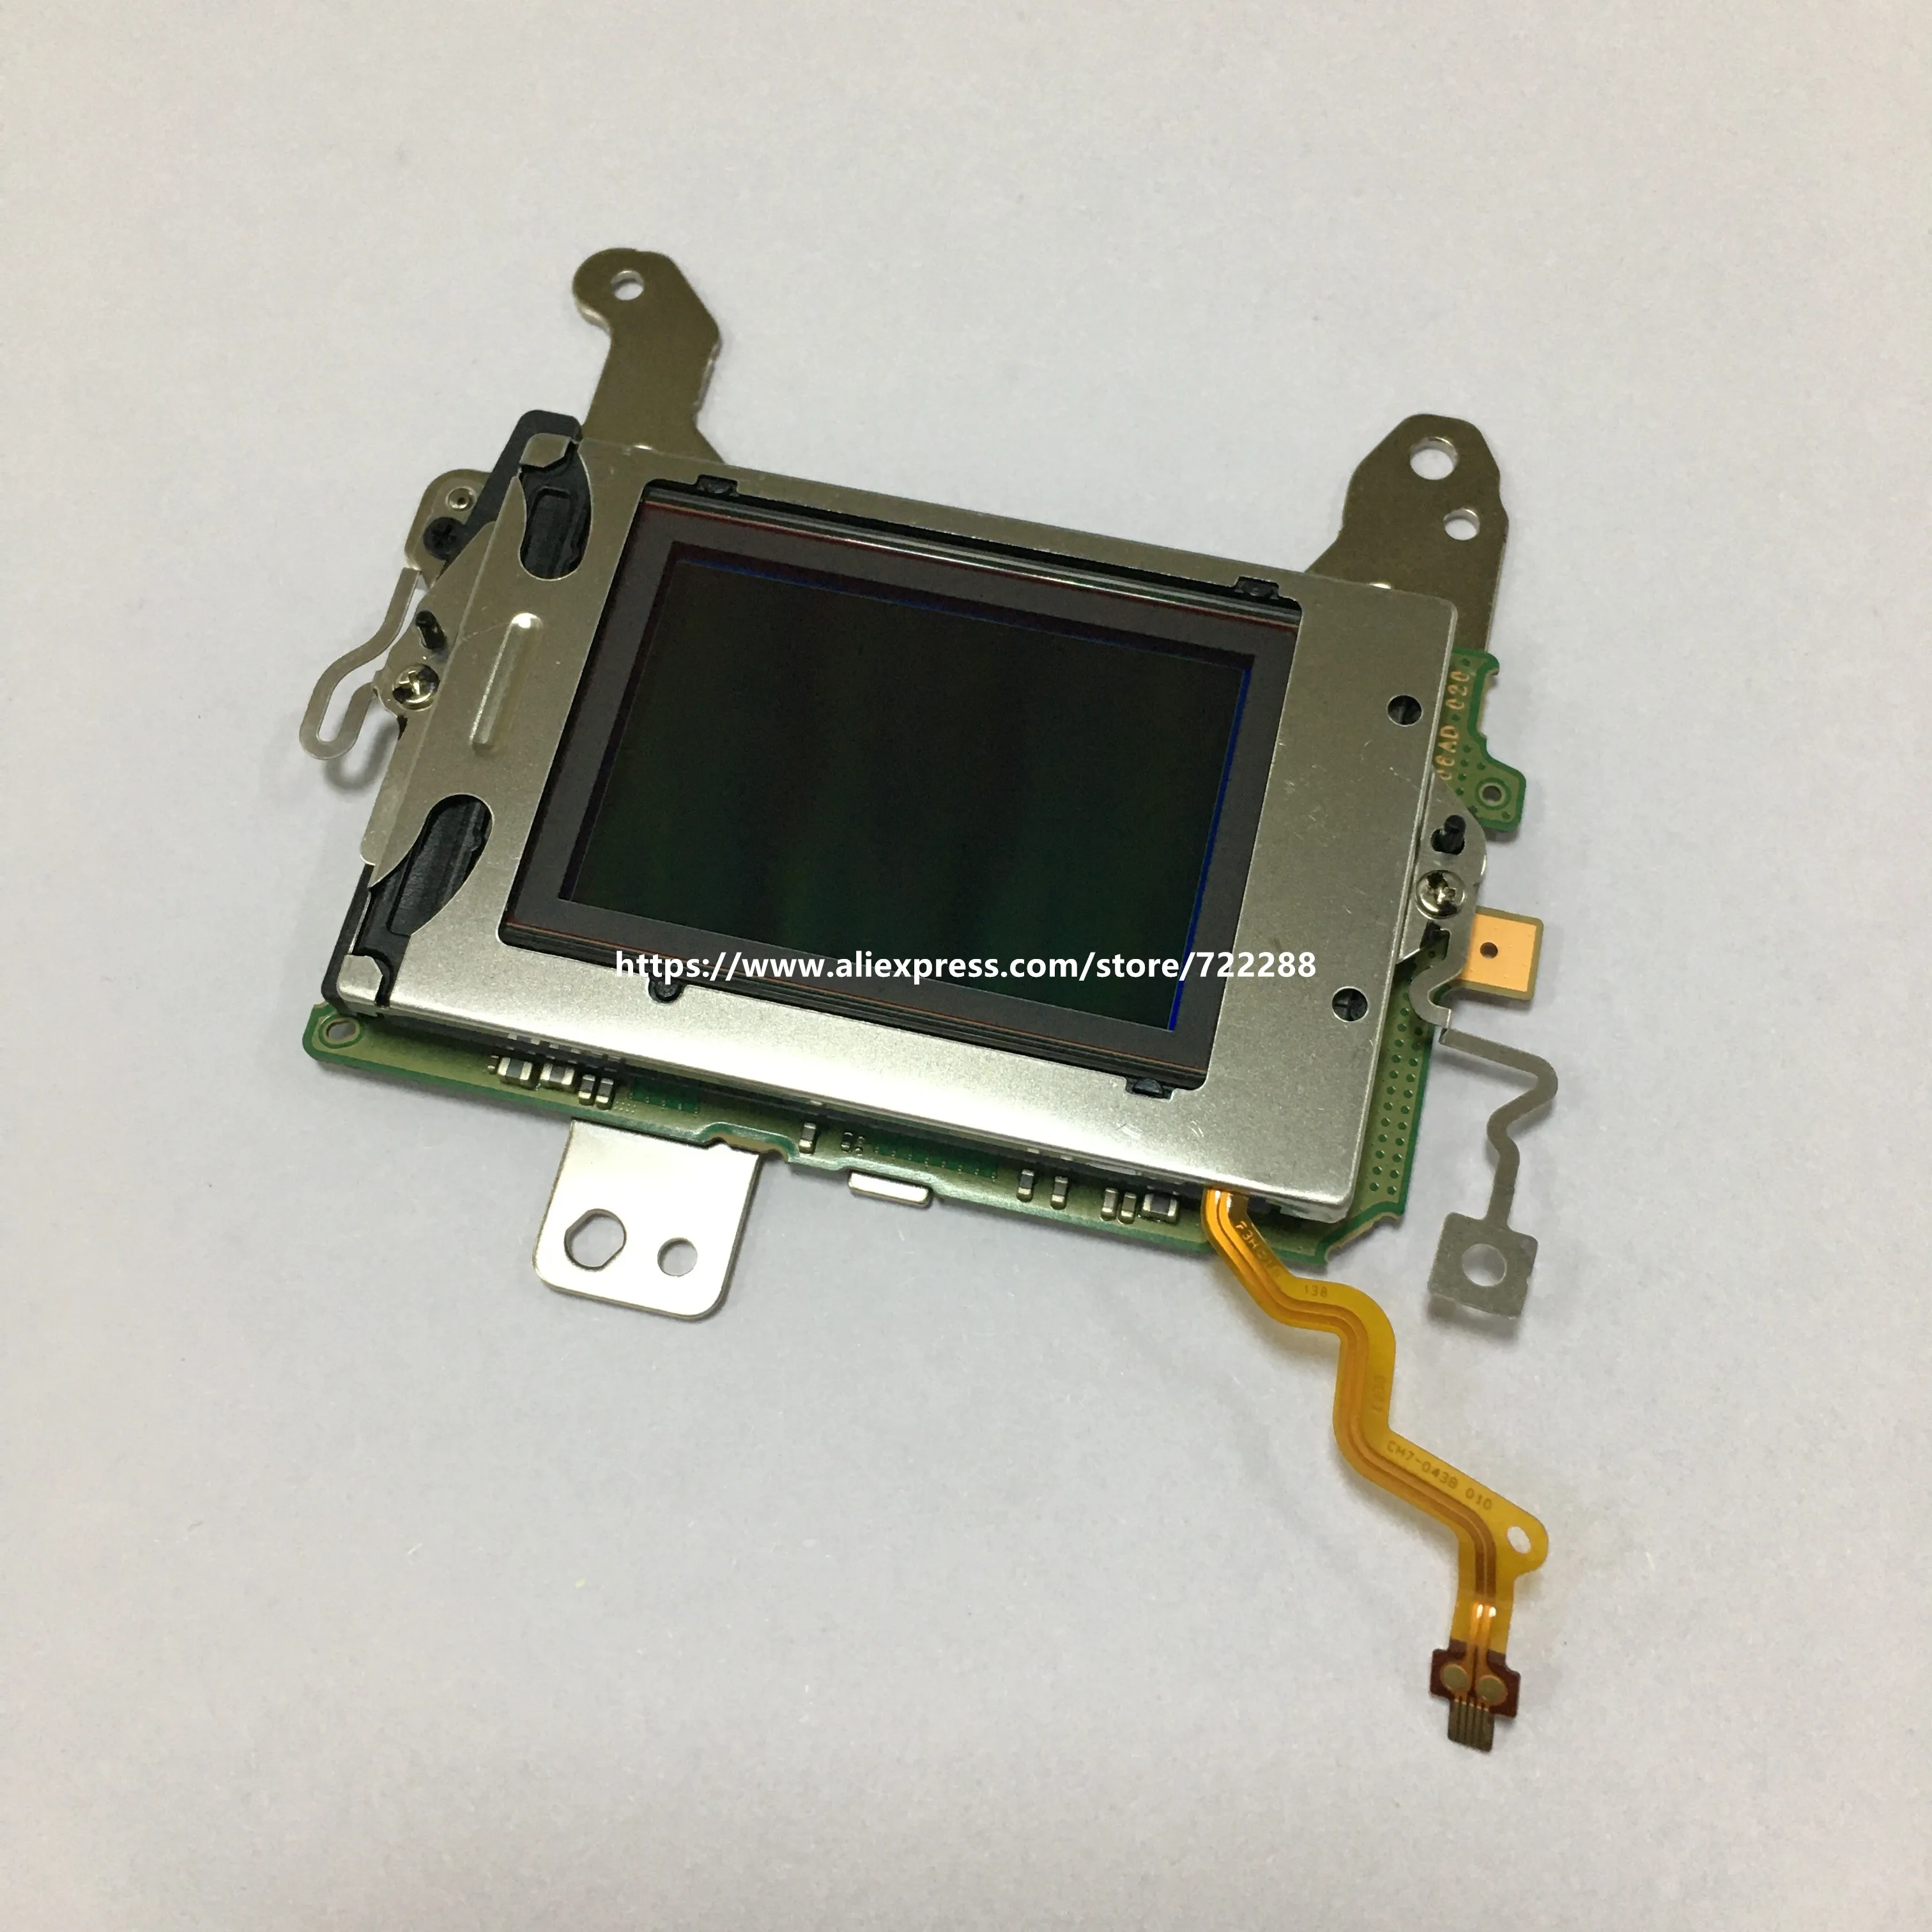 NEW CCD Image Sensor Replacement Unit For Canon 6D COMS Camera Parts